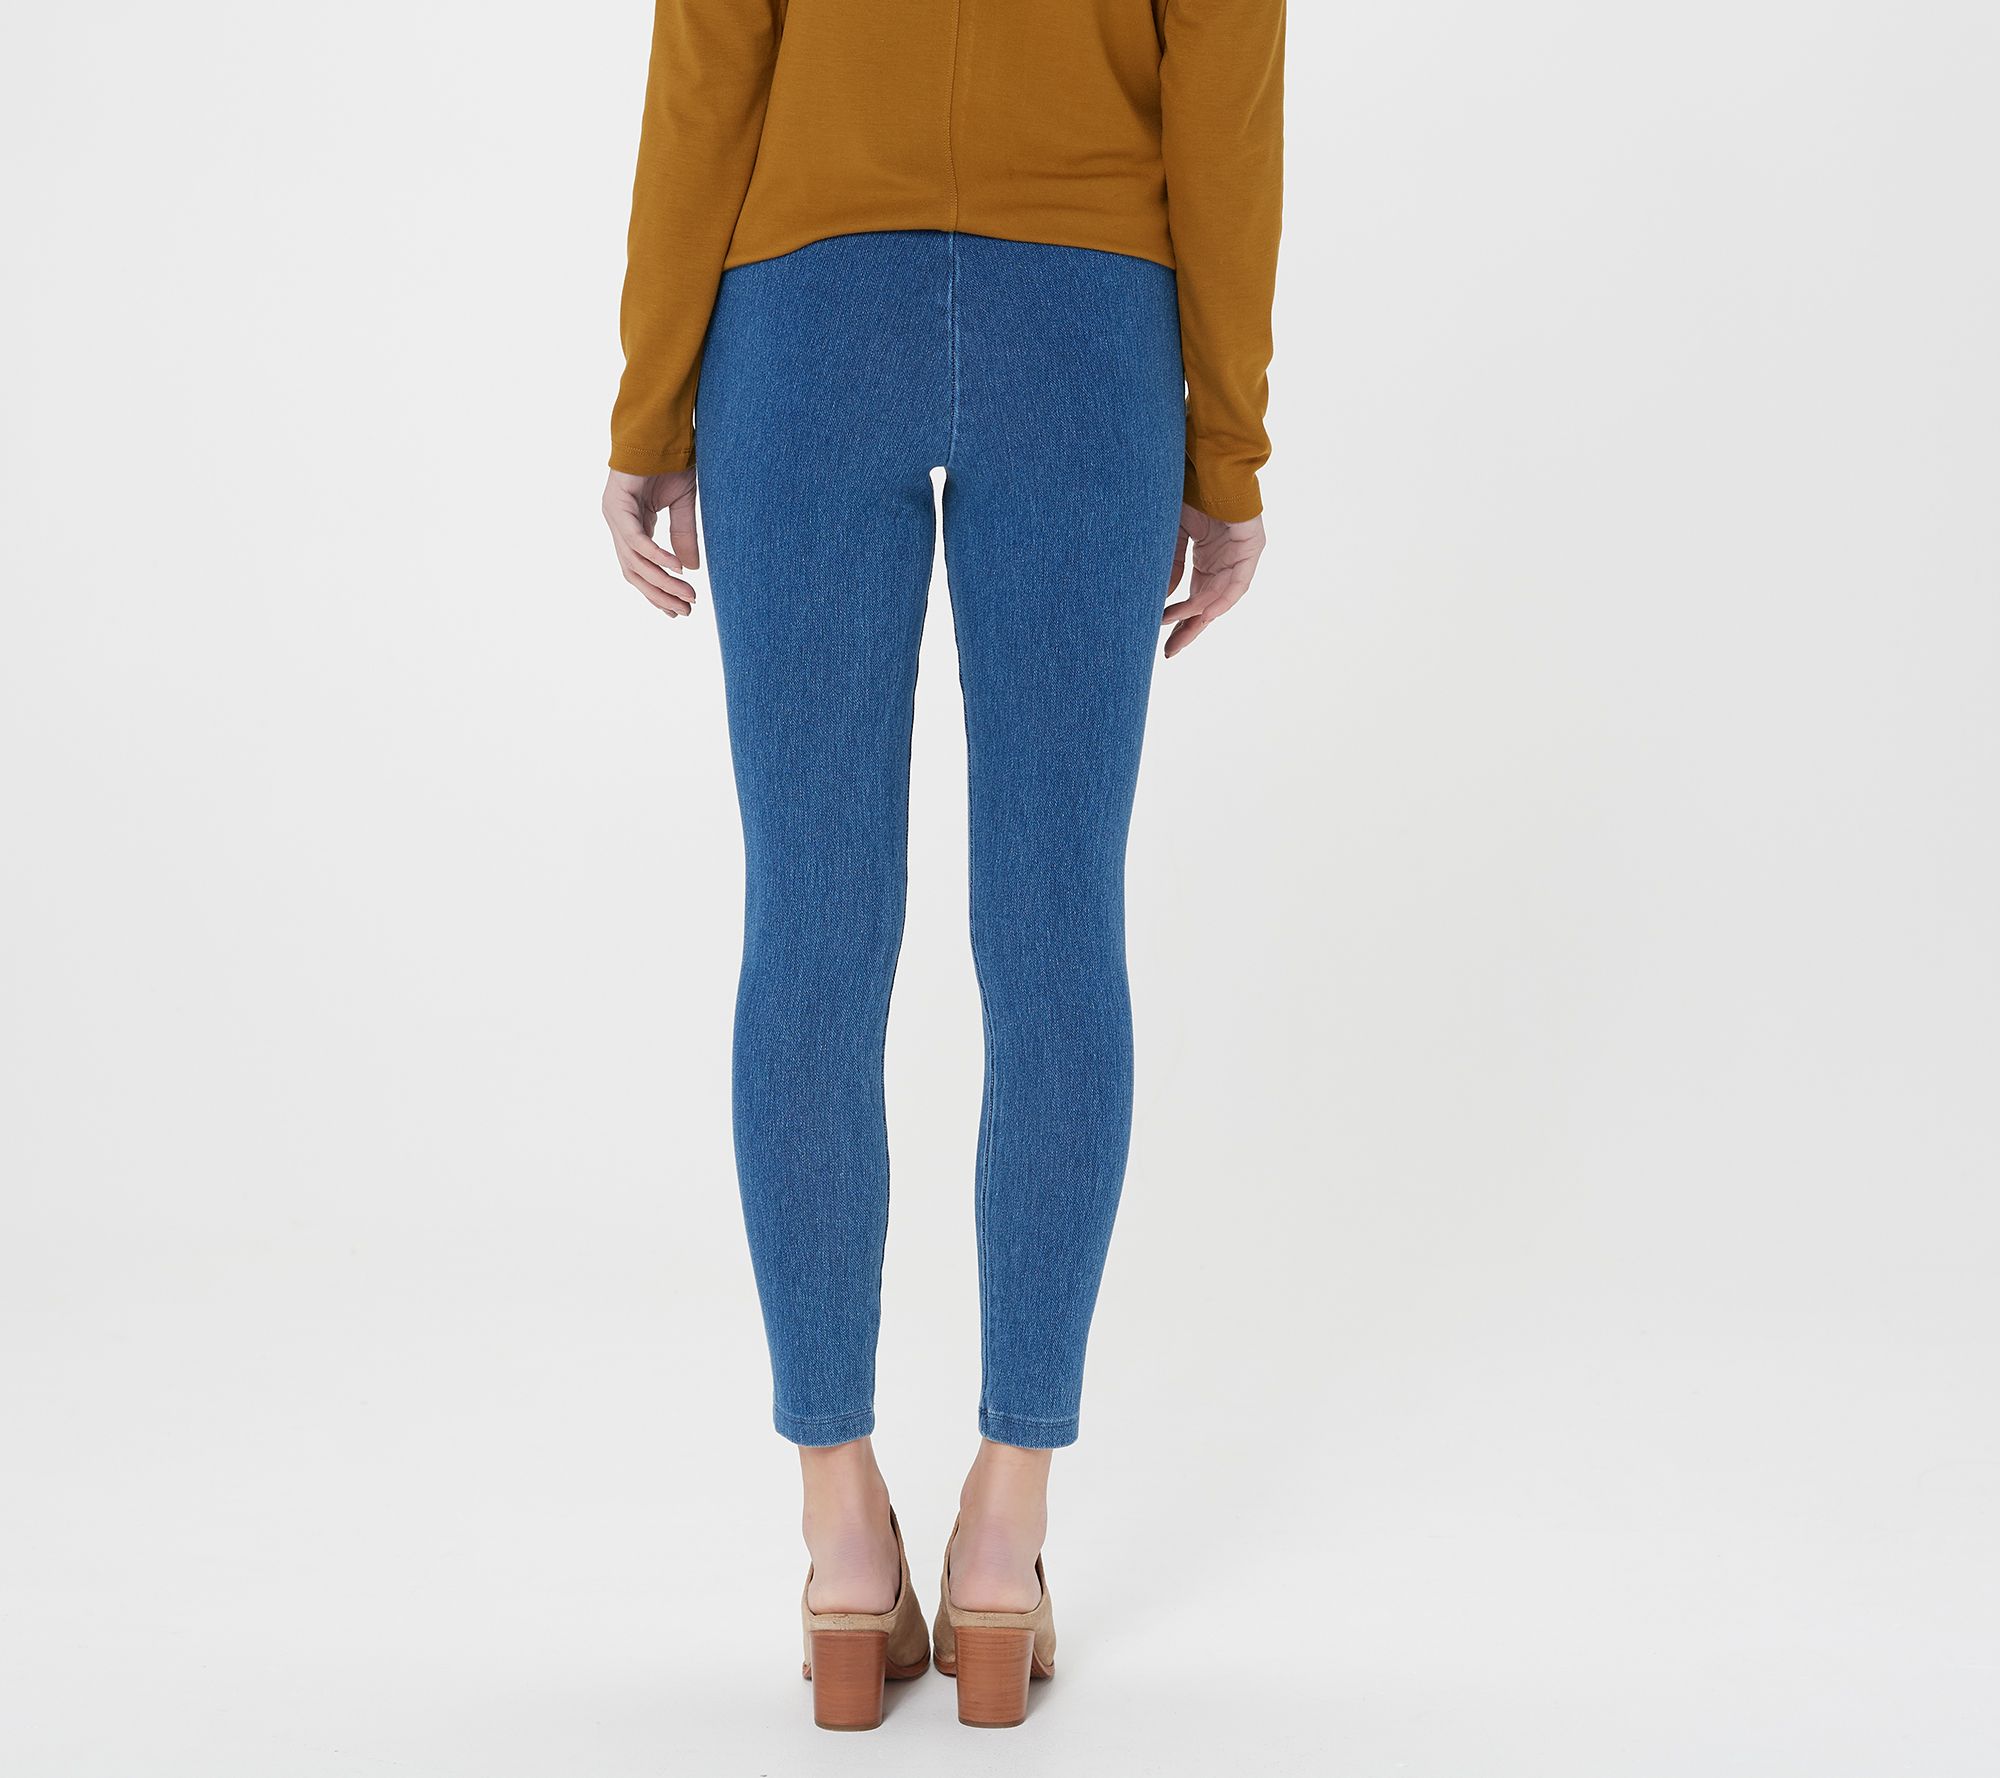 Wicked by Women with Control Prime Stretch Denim Leggings - QVC.com